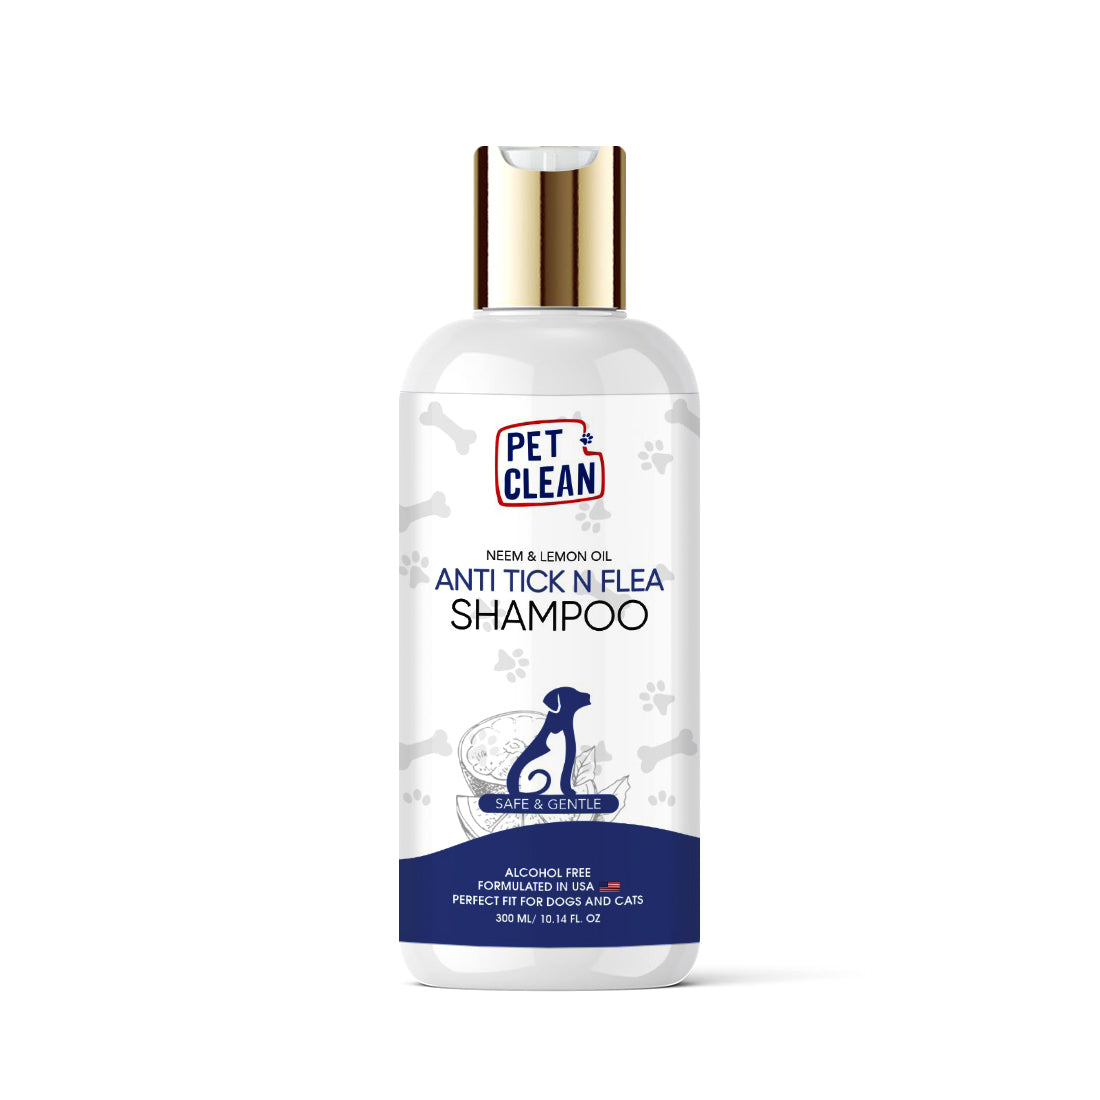 Pet Clean Anti Tick Dog Shampoo for All Breeds, Protects from Ticks, Fleas & Lice, Suitable for Cats and Other Pets (300 ml, Lemon & Neem)